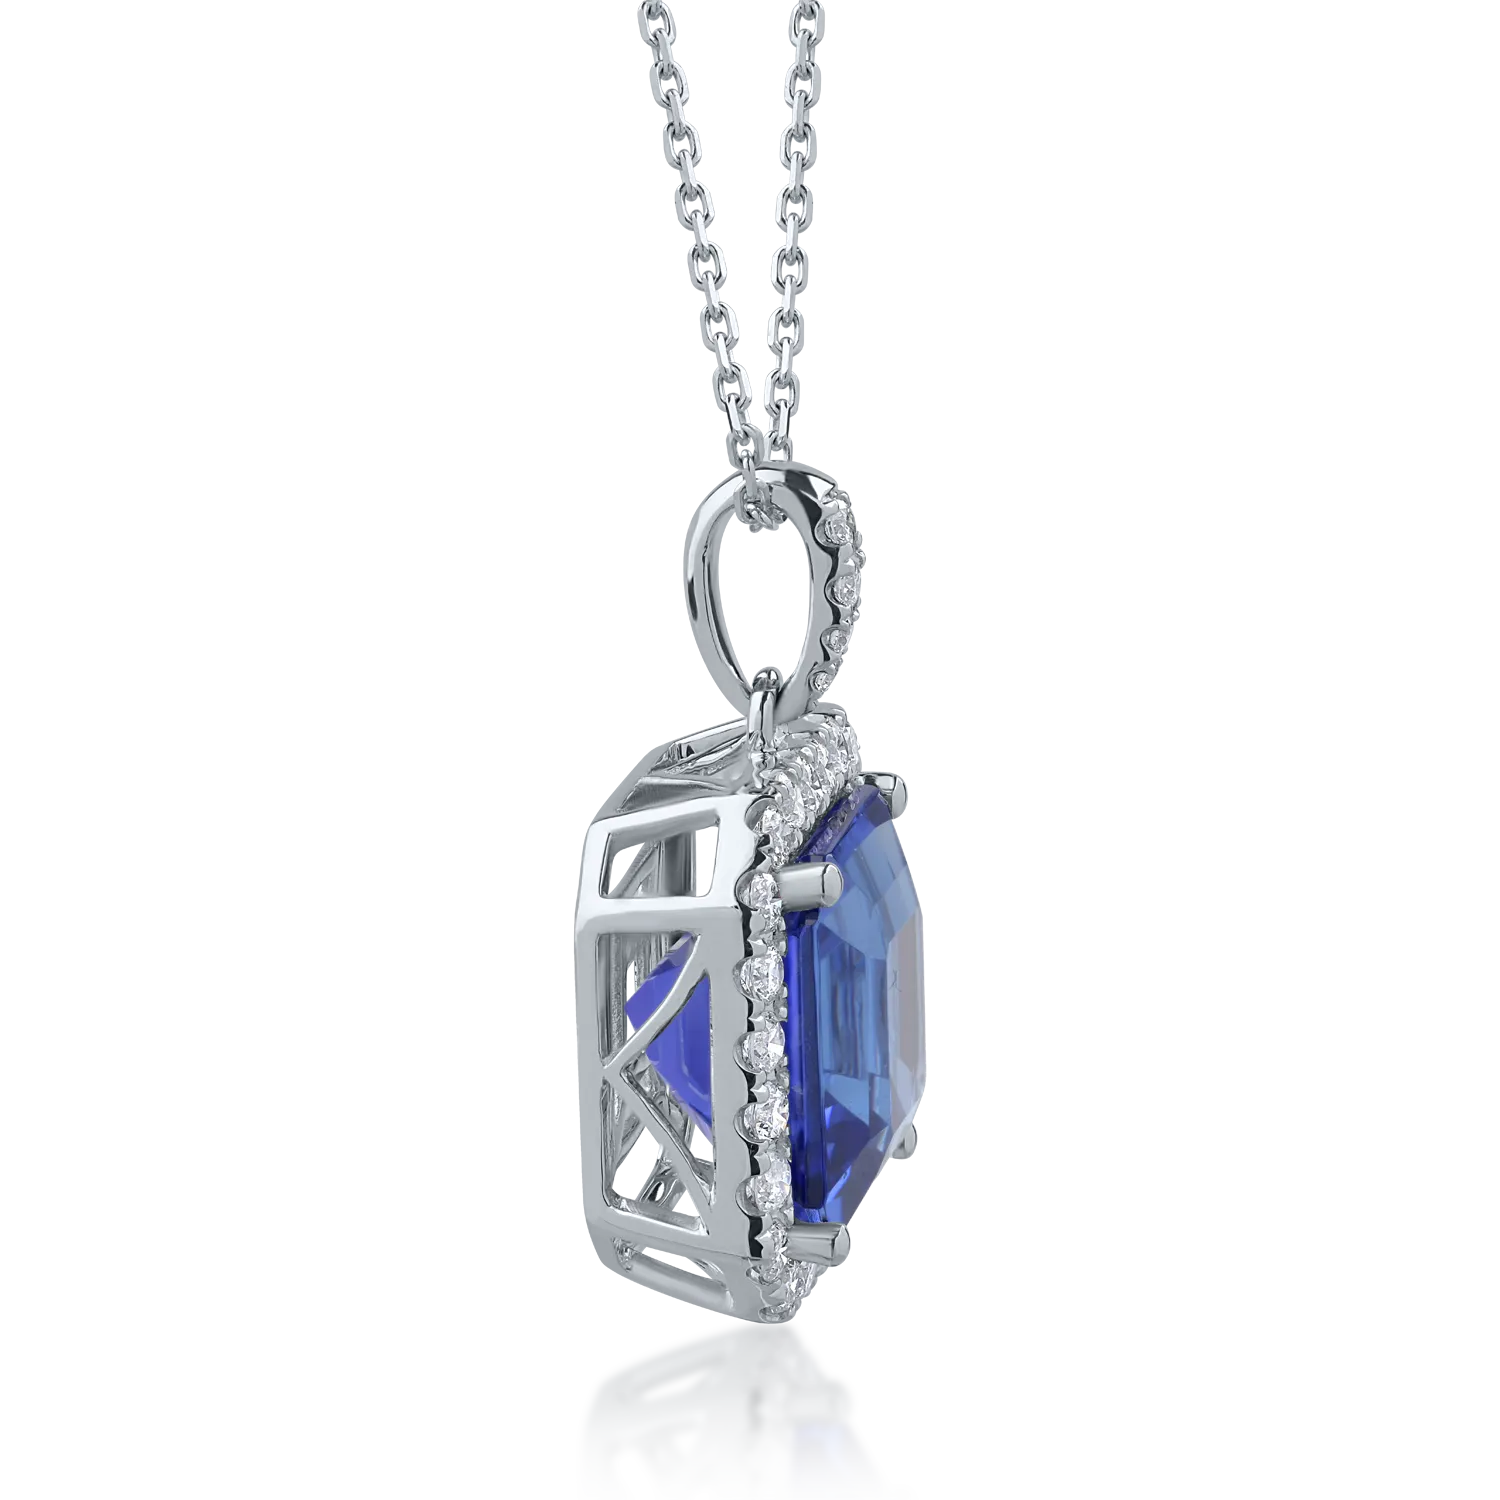 18K white gold pendant necklace with 7.18ct tanzanite and 0.63ct diamonds